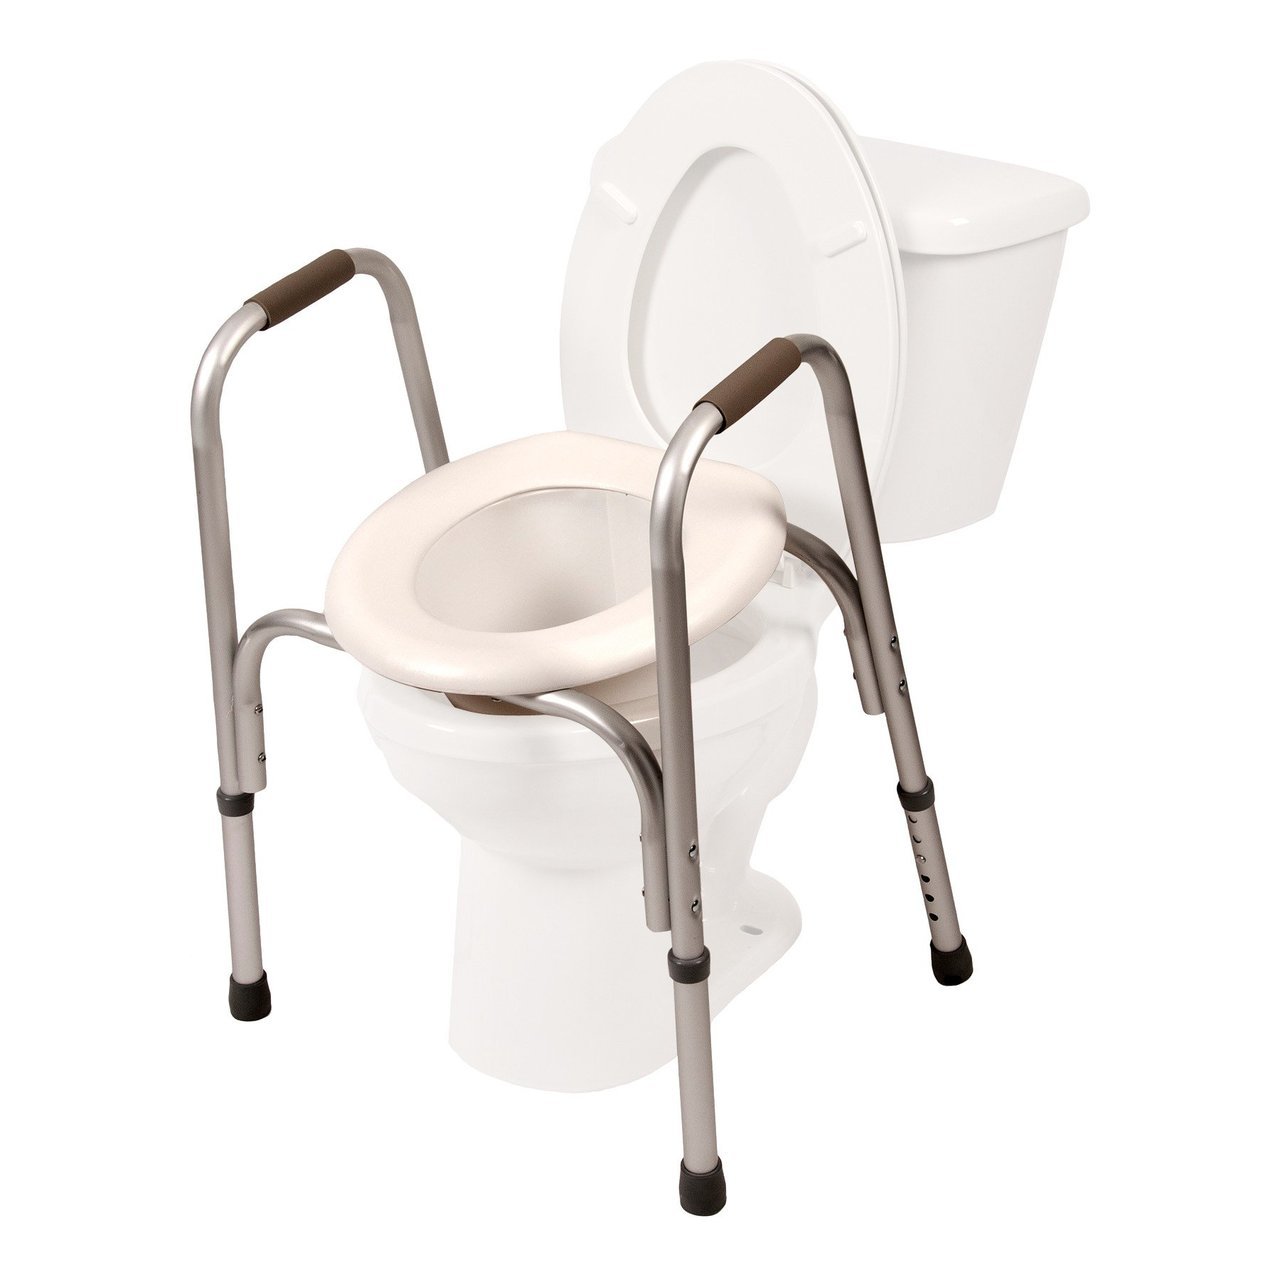 AIR 7007 EA/1 ADJUSTABLE TOILET SAFETY FRAME WITH RAISED SEAT